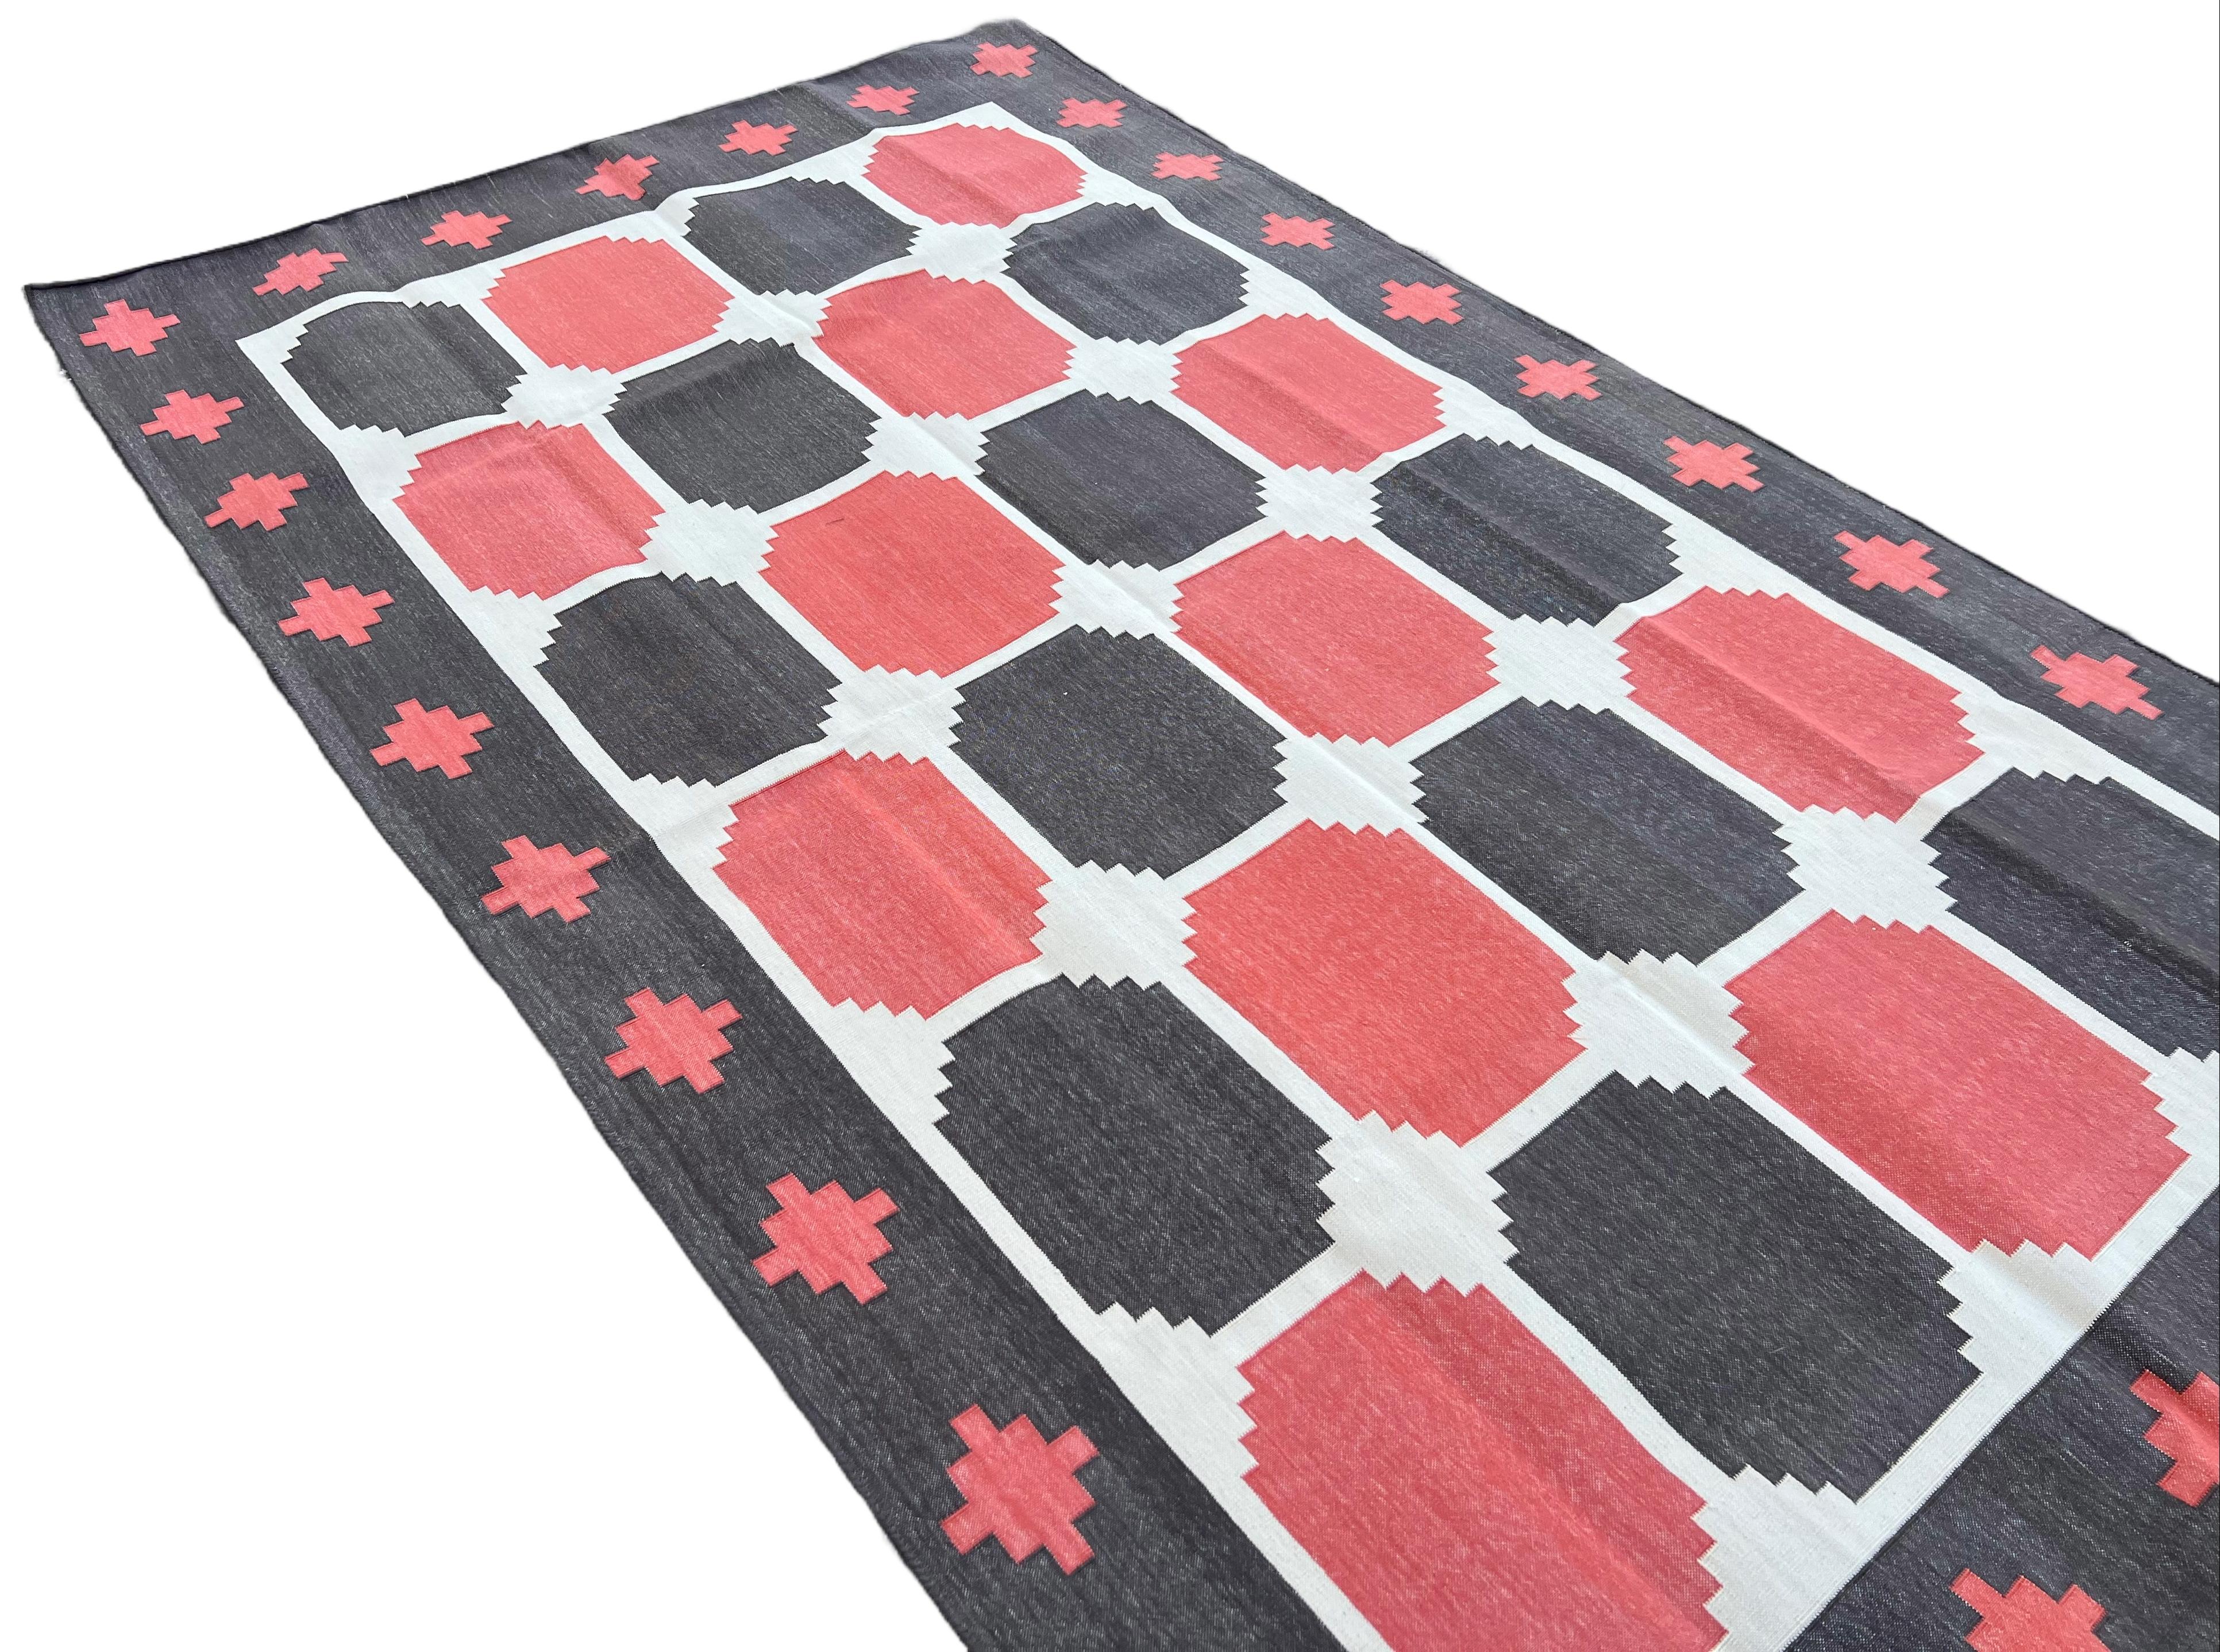 Cotton Vegetable Dyed Reversible Coffee Brown And Coral Red Geometric Patterned Tile Indian Rug - 5'x8'
These special flat-weave dhurries are hand-woven with 15 ply 100% cotton yarn. Due to the special manufacturing techniques used to create our